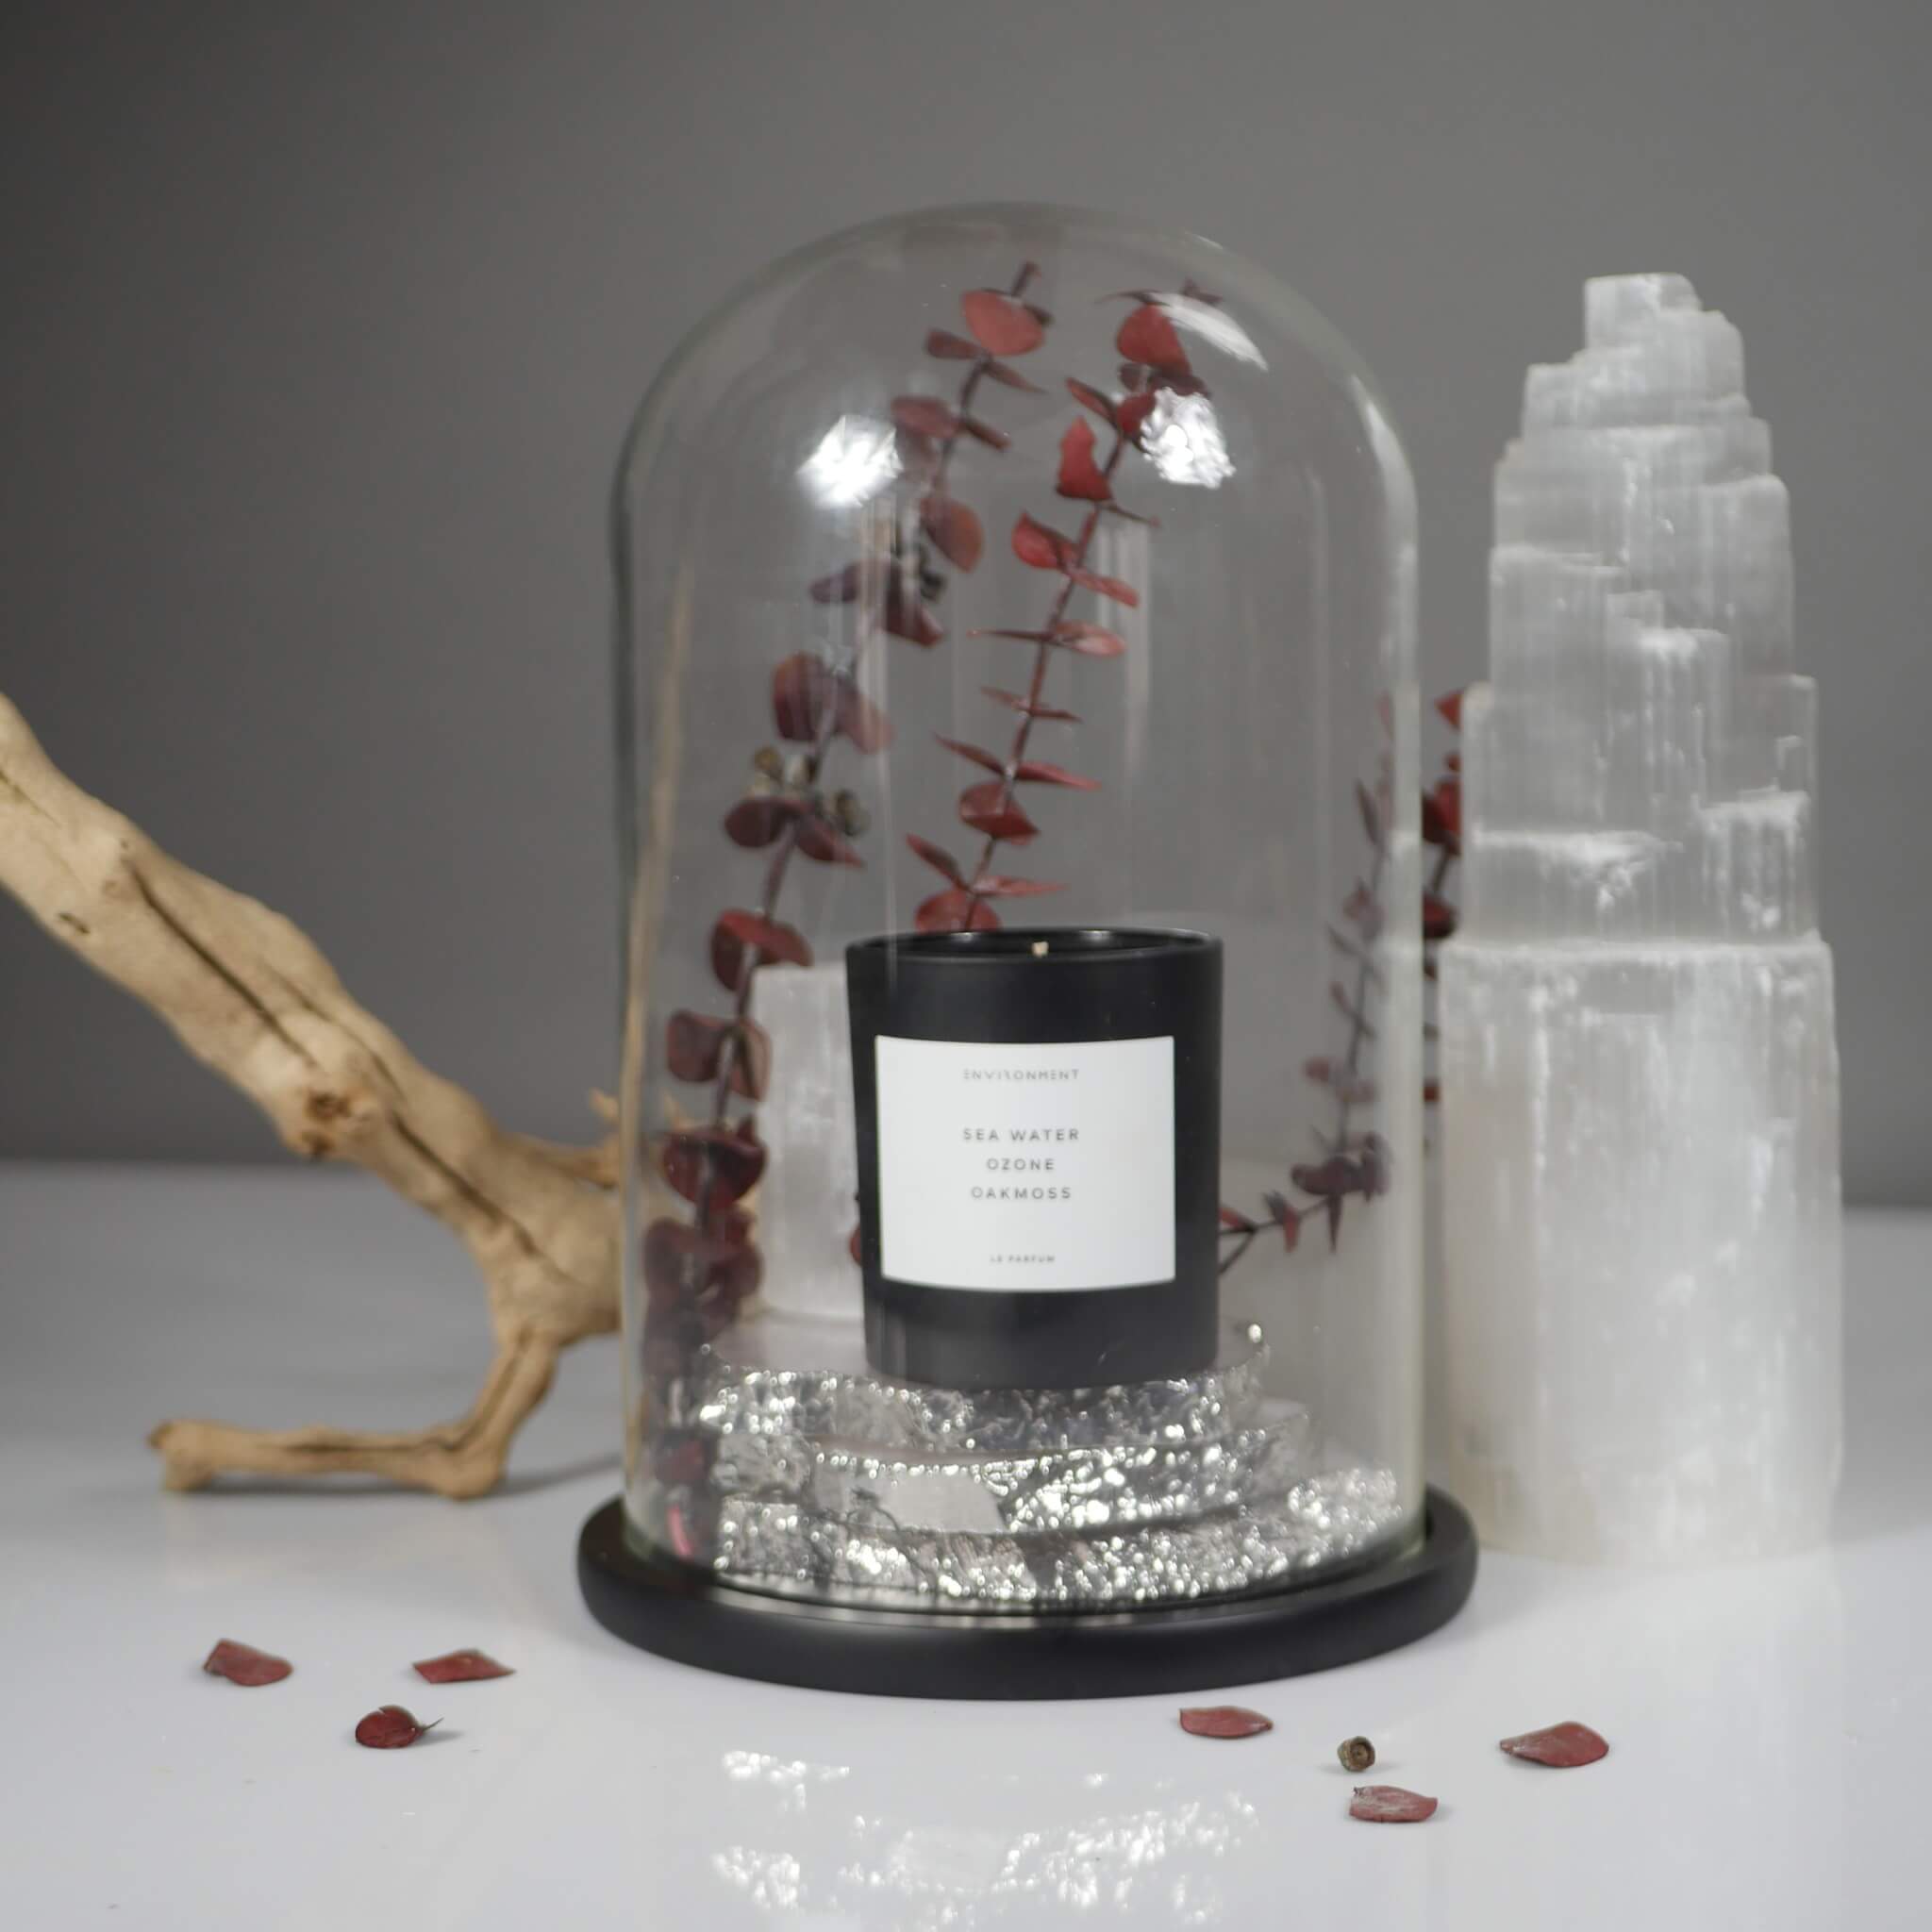 8oz Baies | Currants | Quince Candle with Lid and Box (Inspired by Diptyque Baies®)